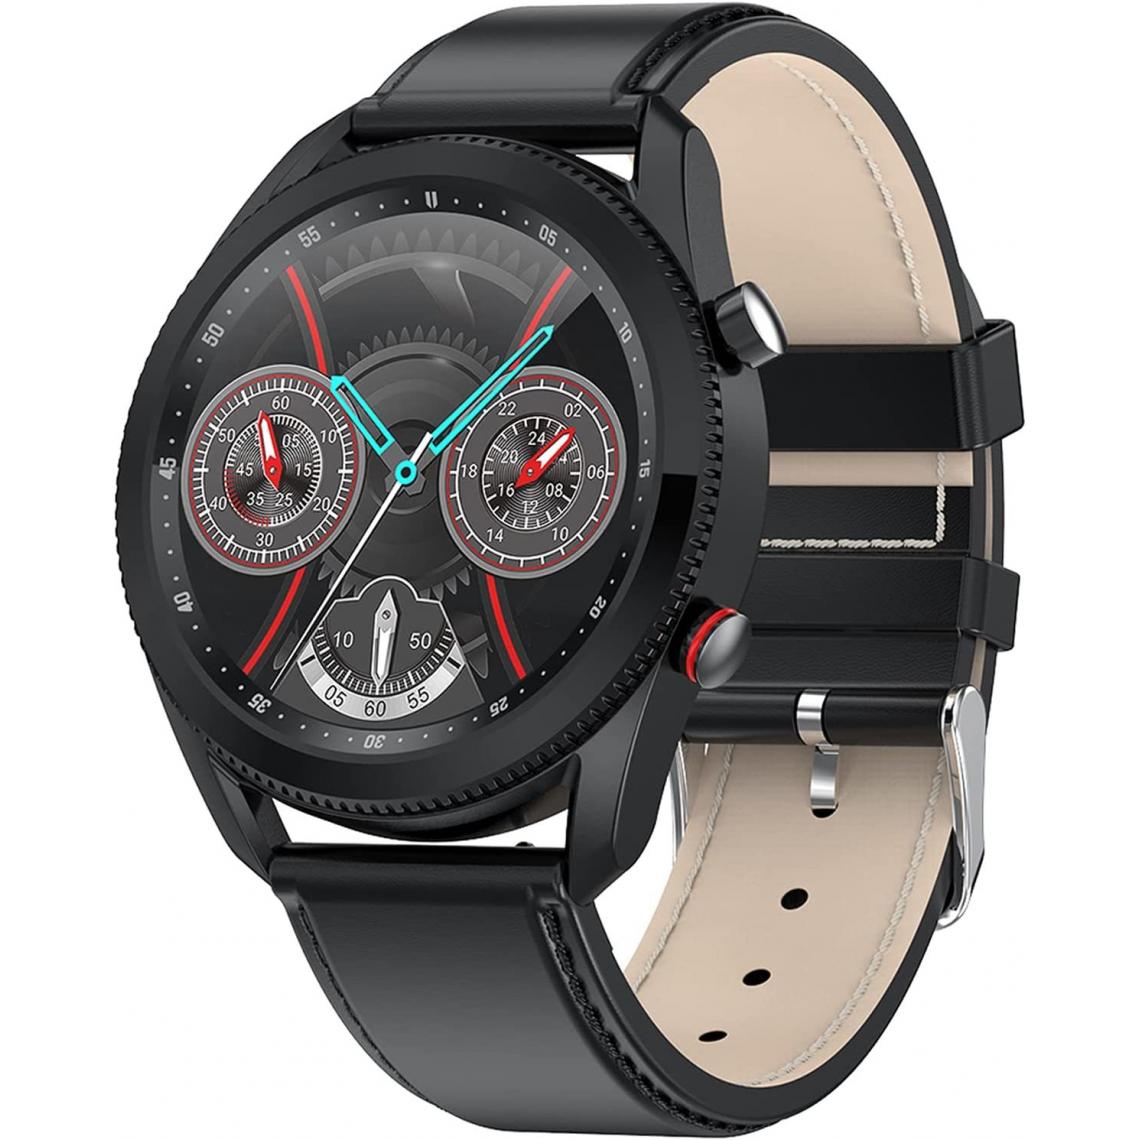 Chronotech Montres - Chronus Connected Watch Smartwatch, 1.28 Inch with Bluetooth Calls, Heart Rate Monitor, Sport Watch with Pedometer Calories Sleep Stopwatch, Smart Bracelet Screen(black) - Montre connectée